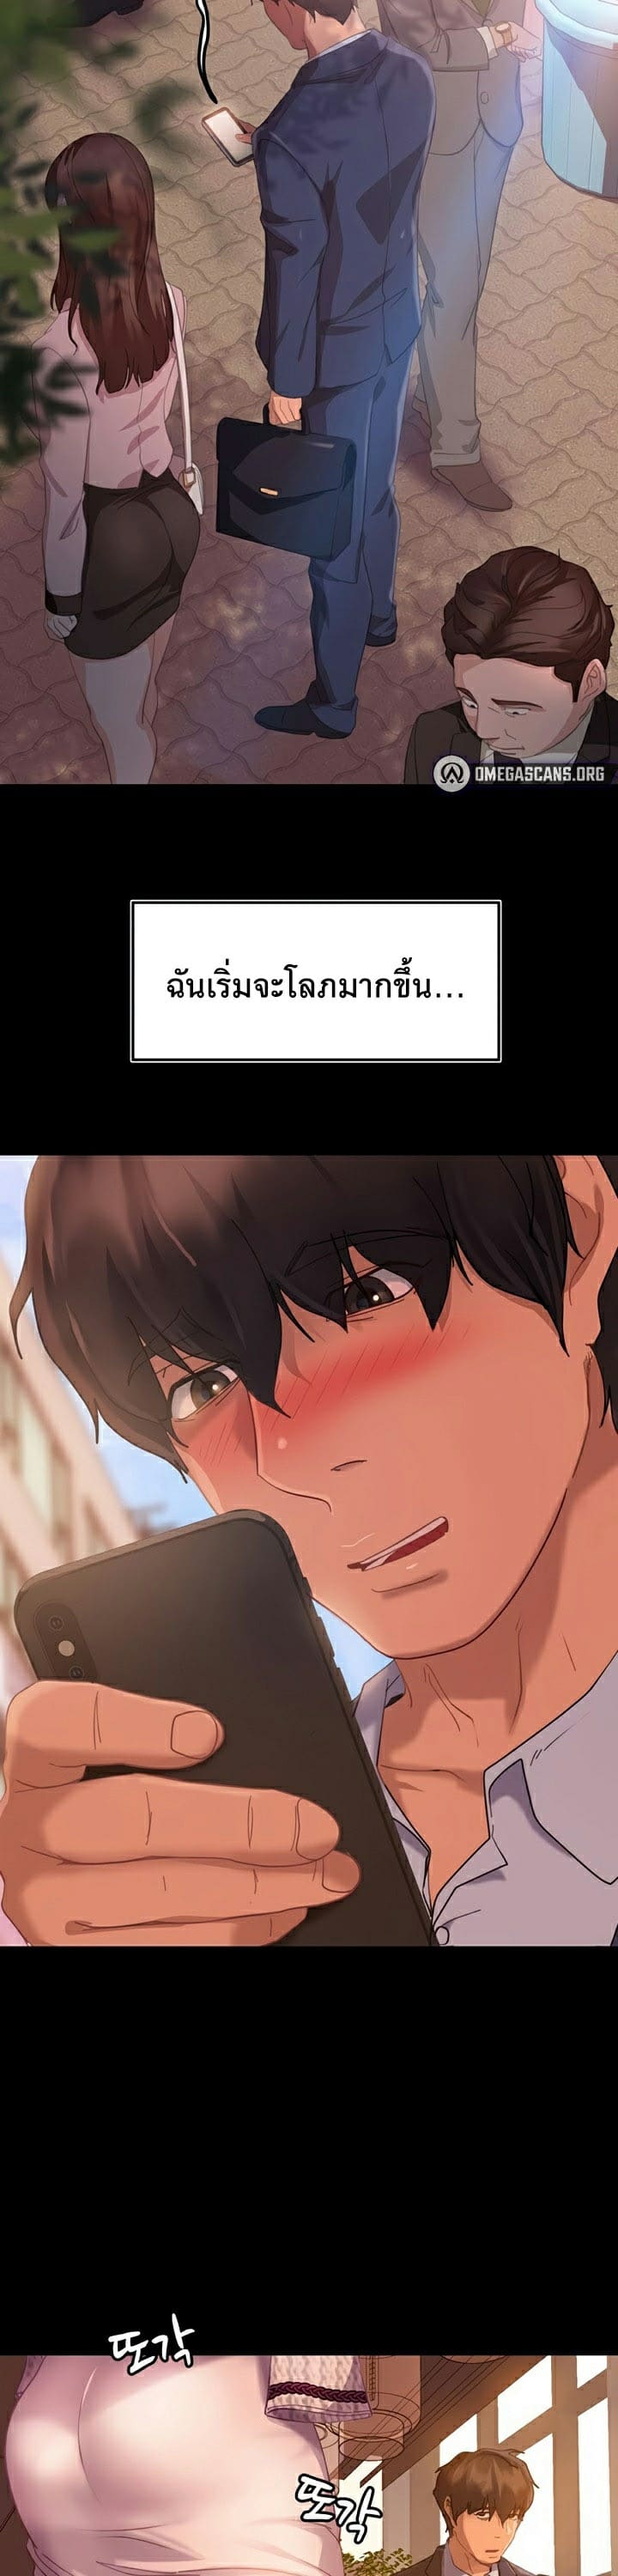 Marriage Agency Review ตอนที่ 1 ภาพ 32